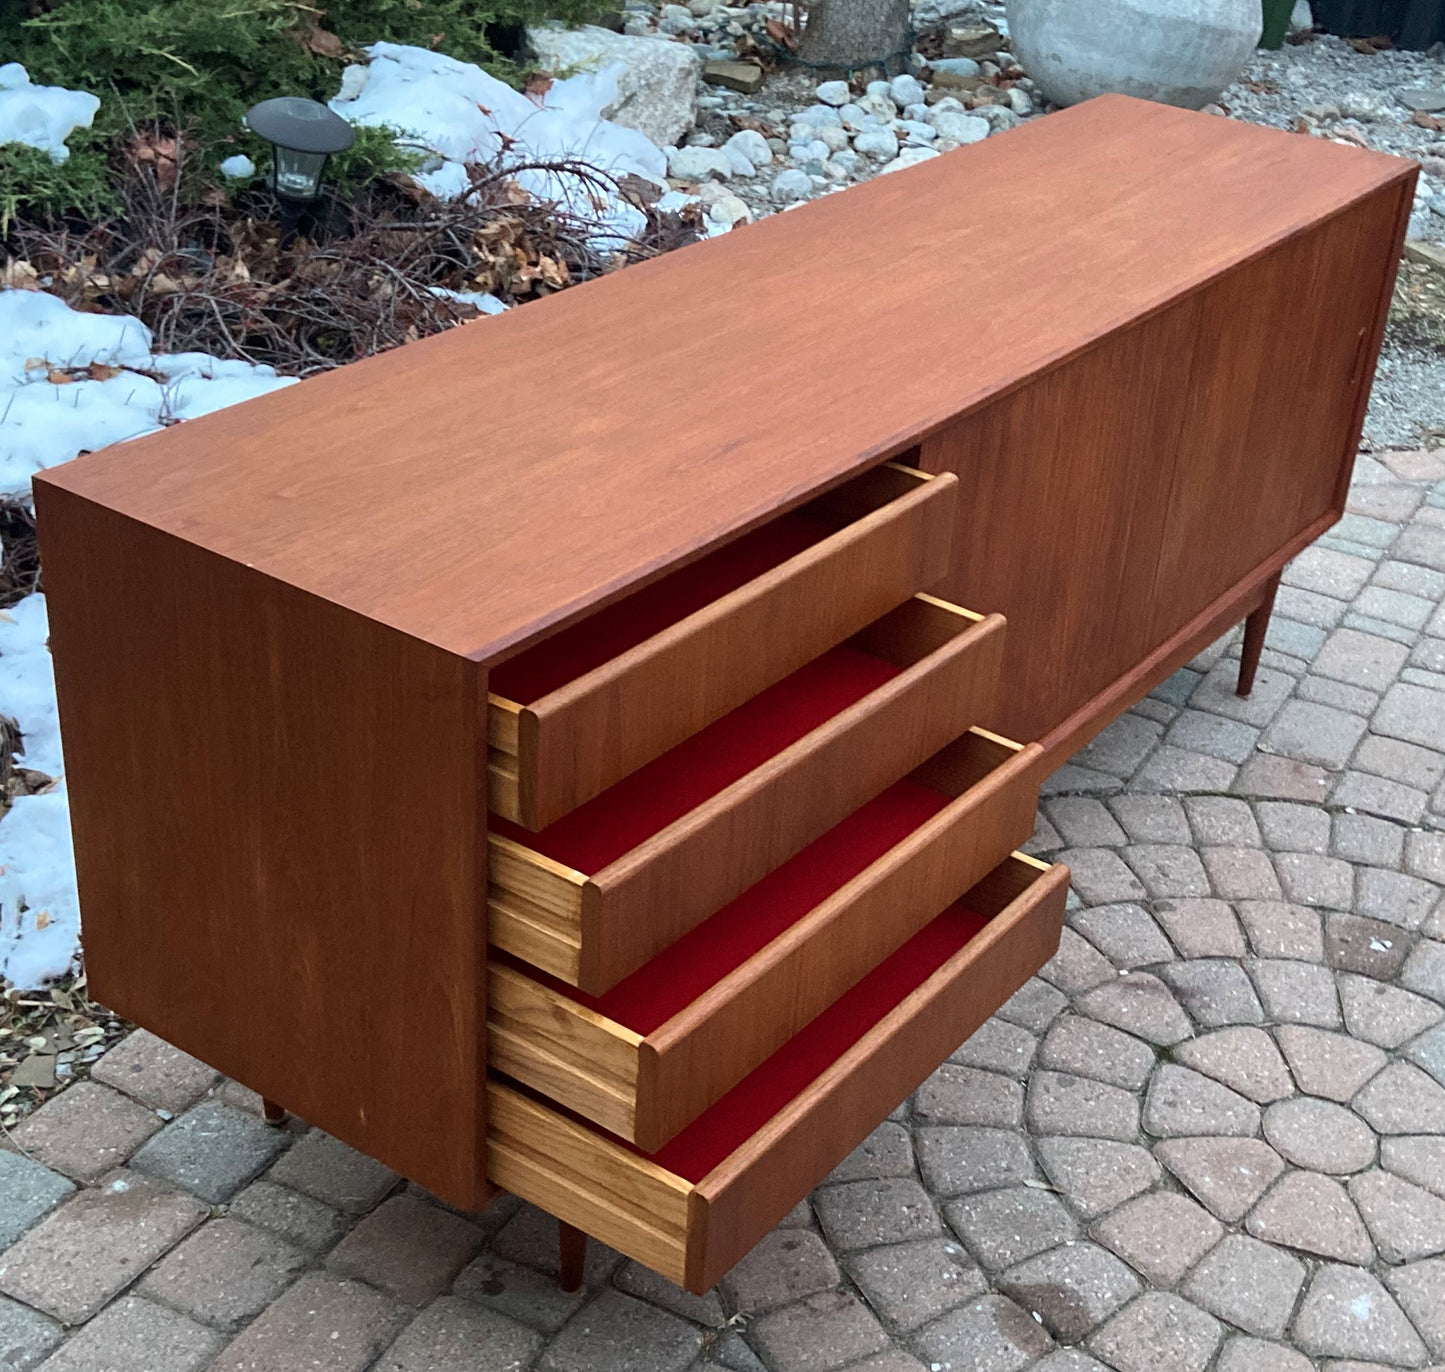 REFINISHED MCM Teak Sideboard Buffet Media Console, Perfect